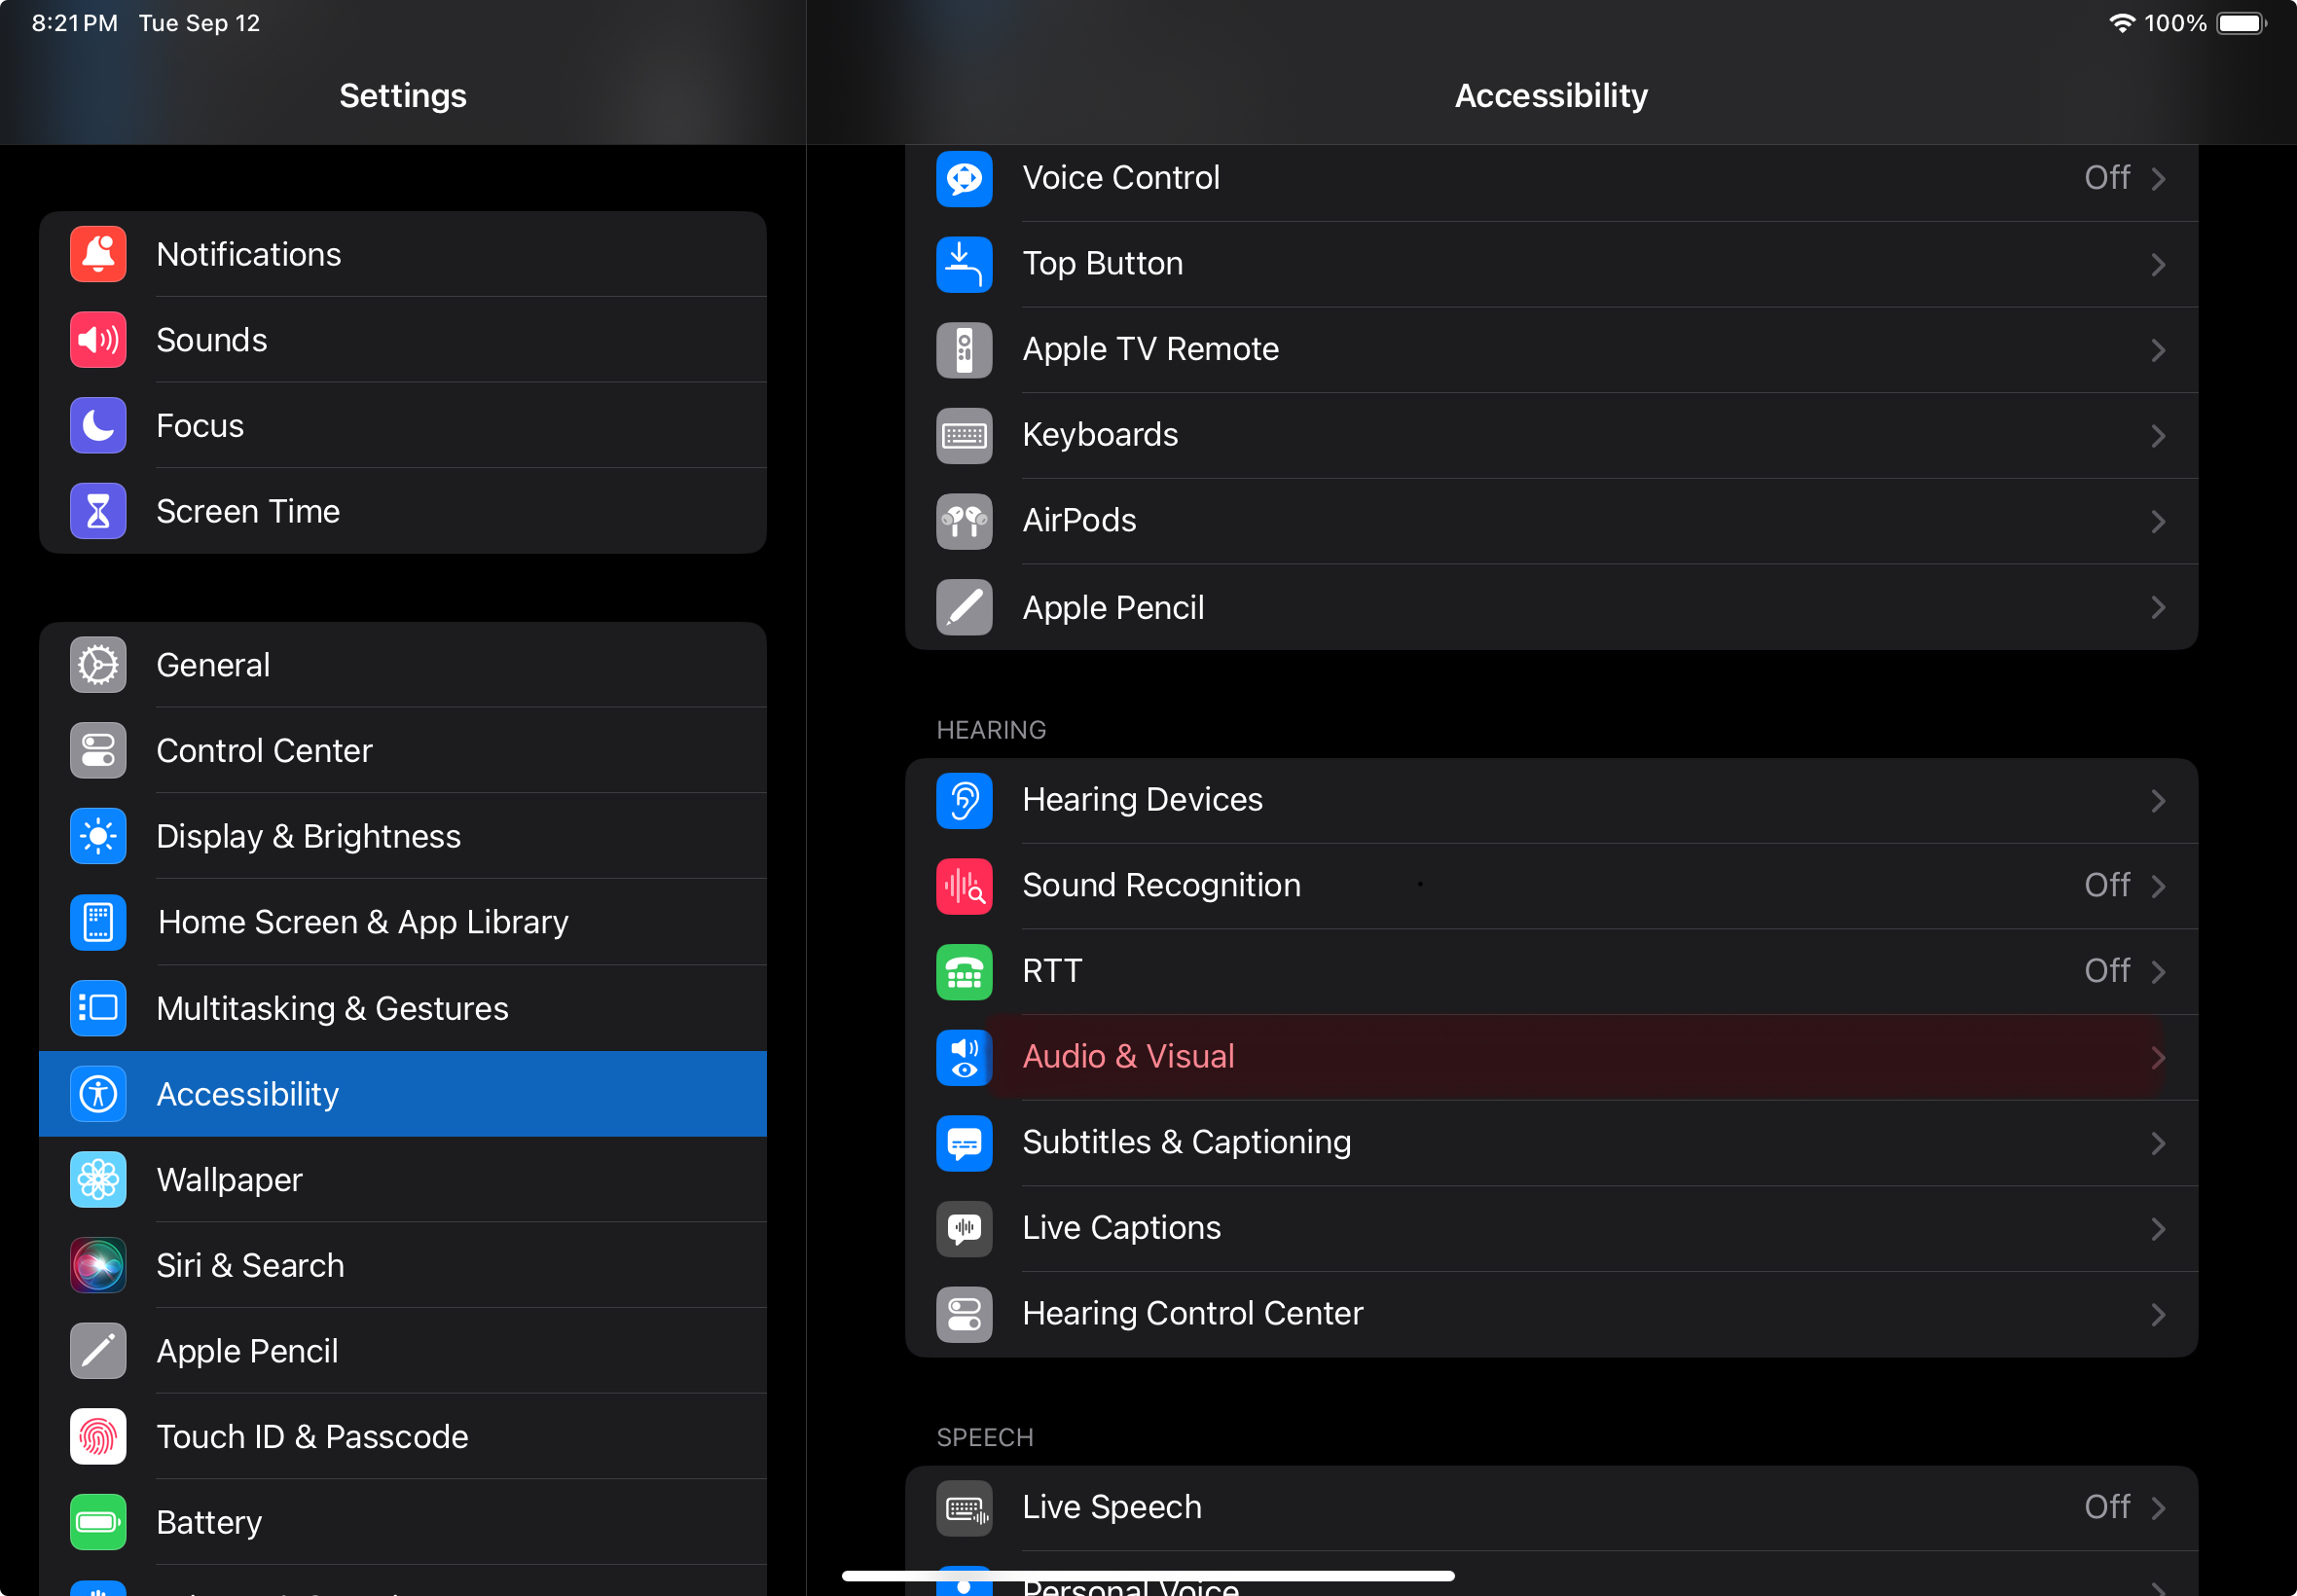 A screenshot of the Accessibility panel in the  settings app on the iPad. Audio and Visual is highlighted